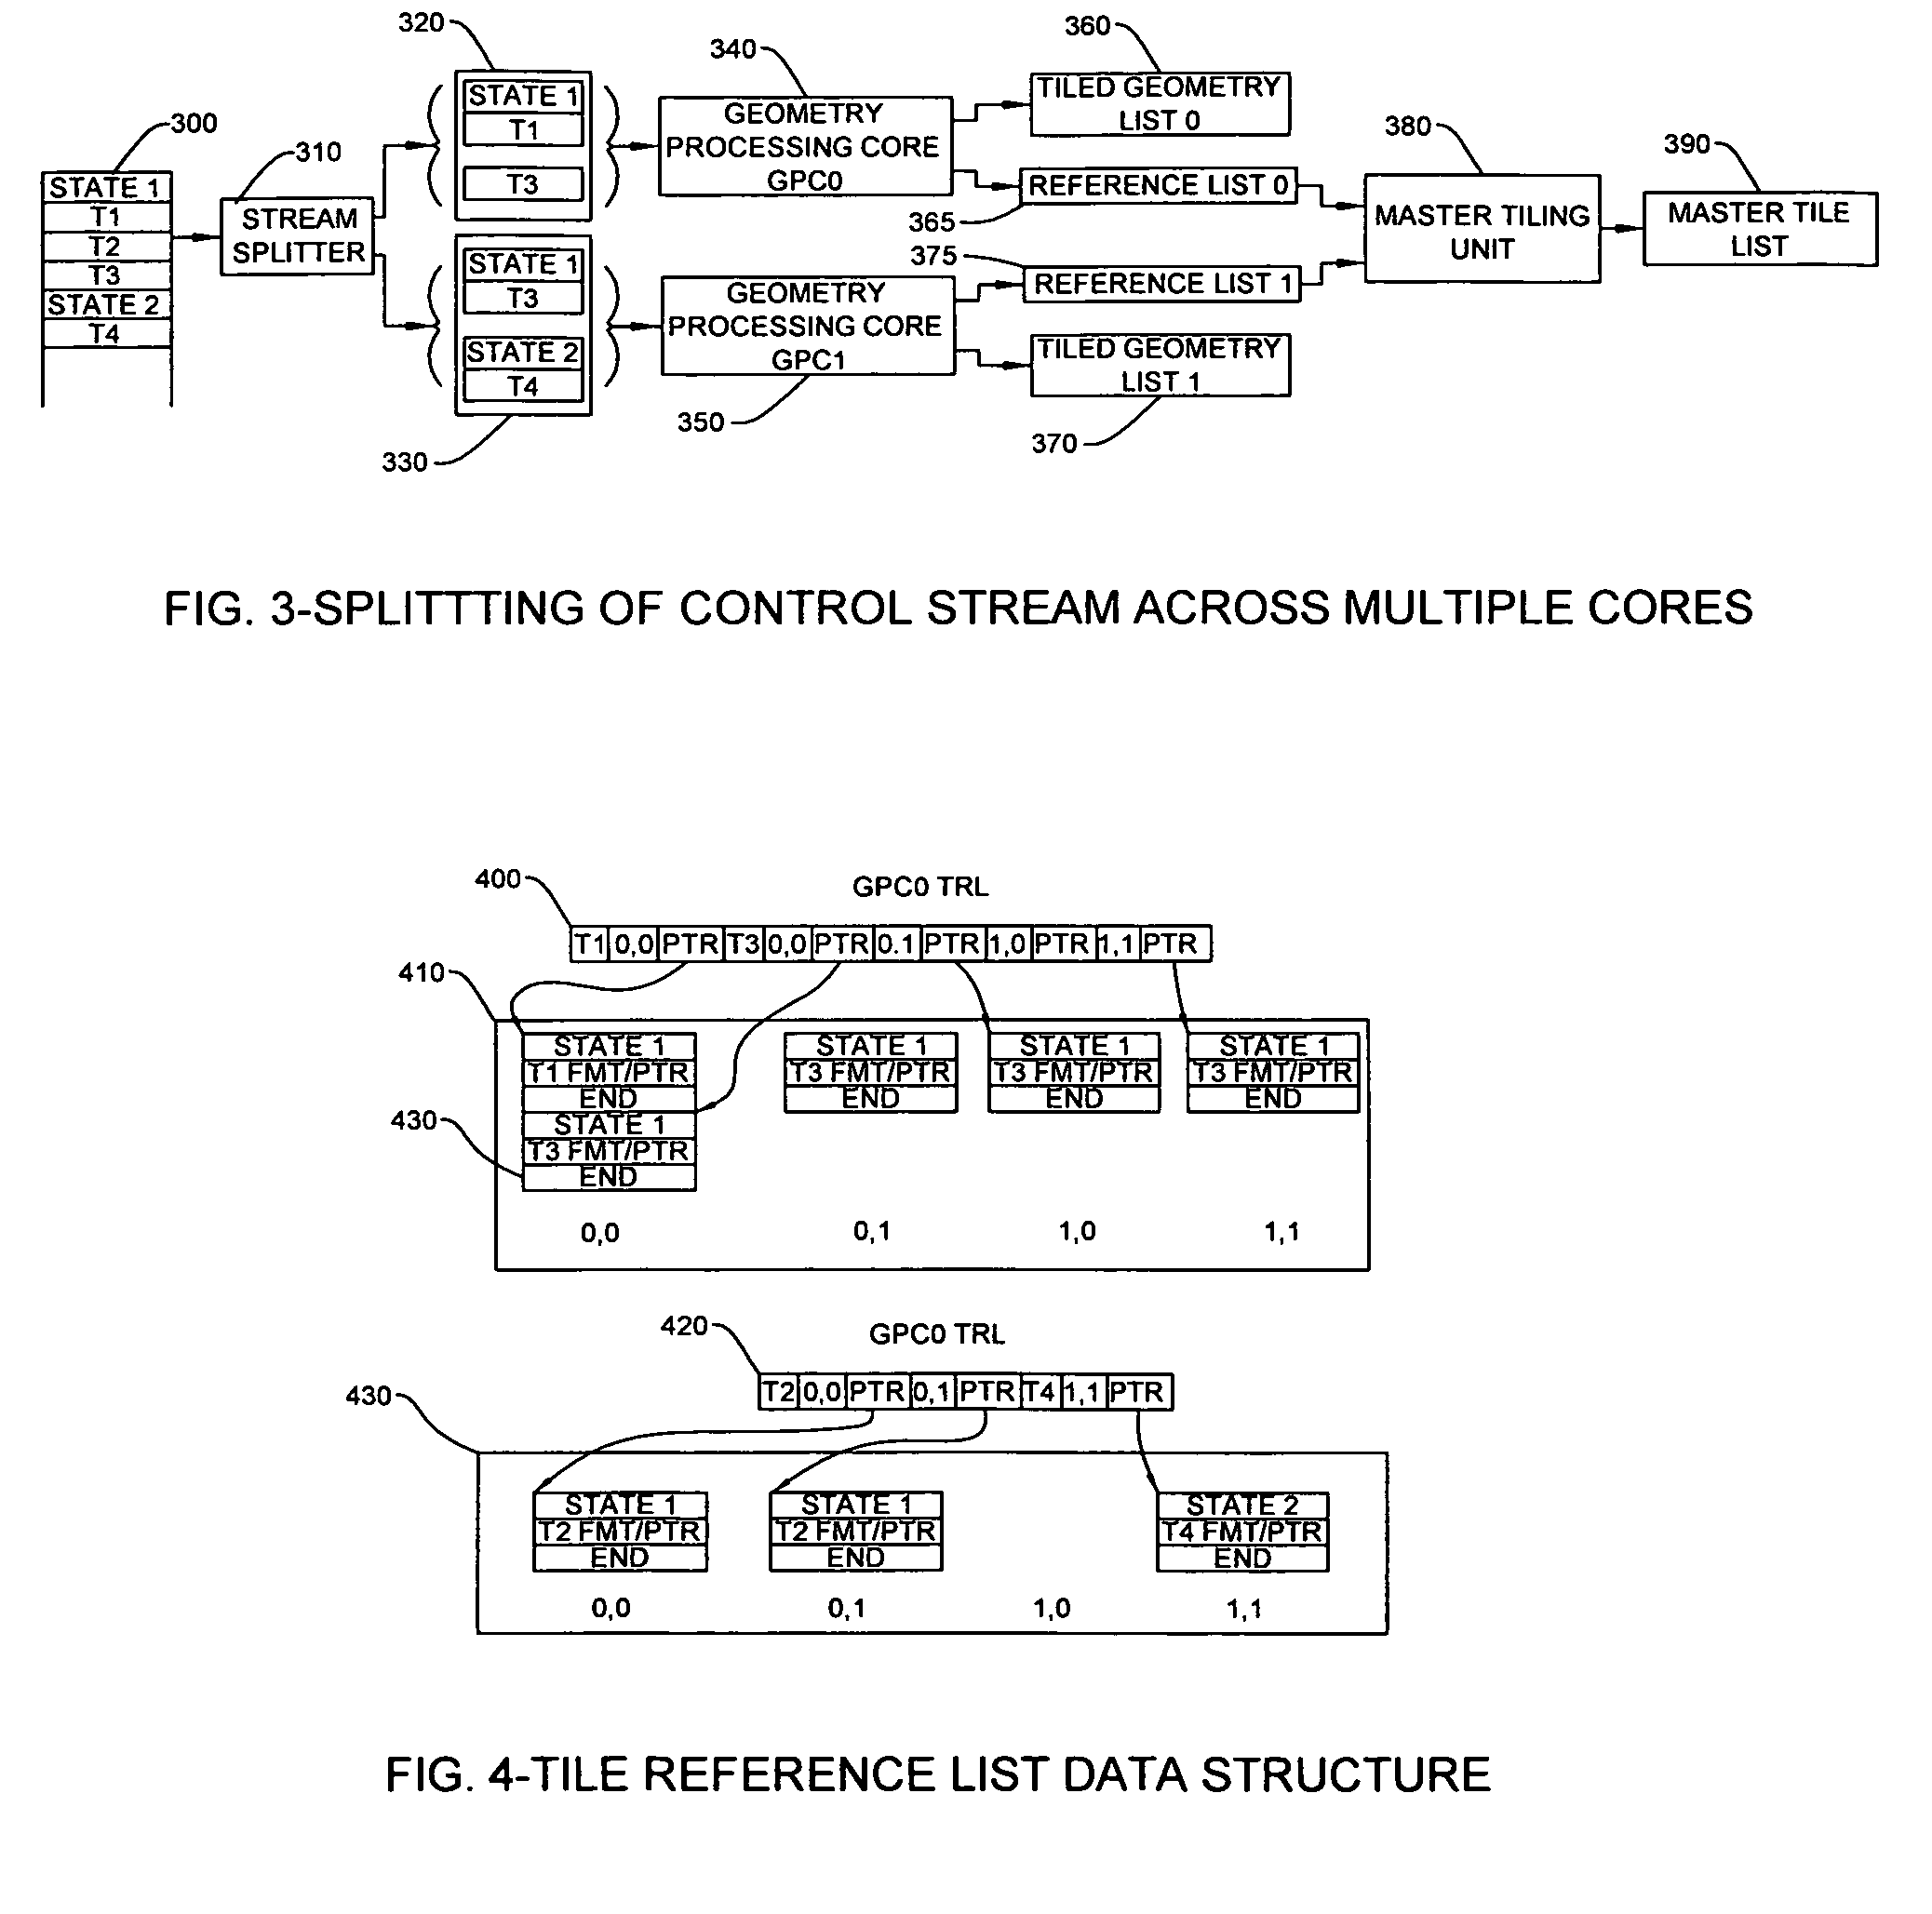 Multi-core geometry processing in a tile based rendering system